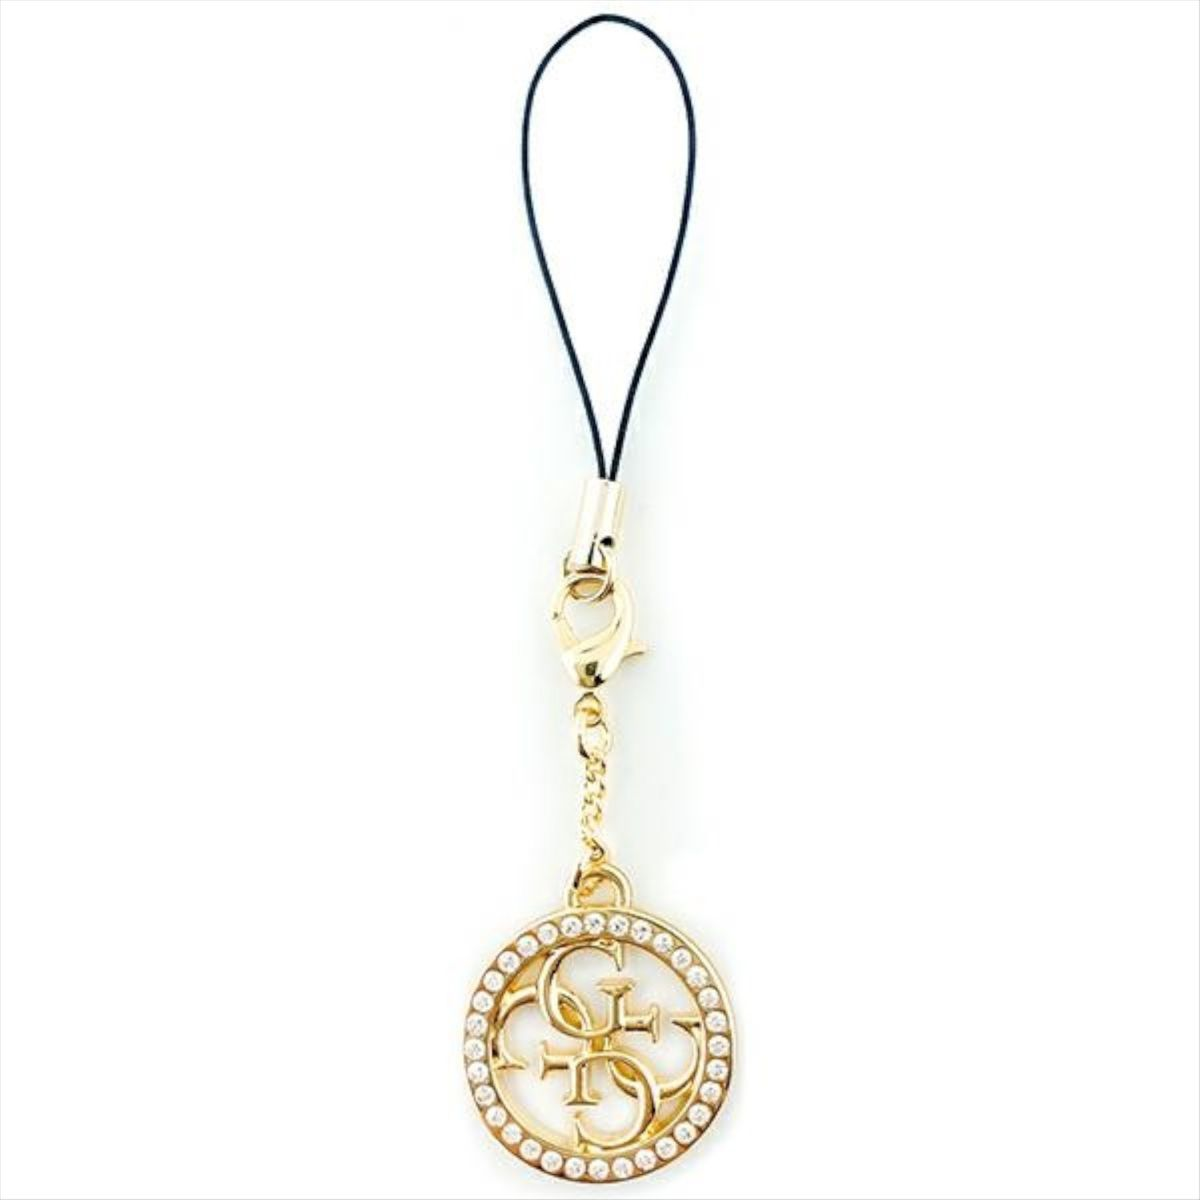 4G Charm Guess Universell, Universell, Phone Strap Anhänger, GUESS Rhinestone Gold Umhängetasche,